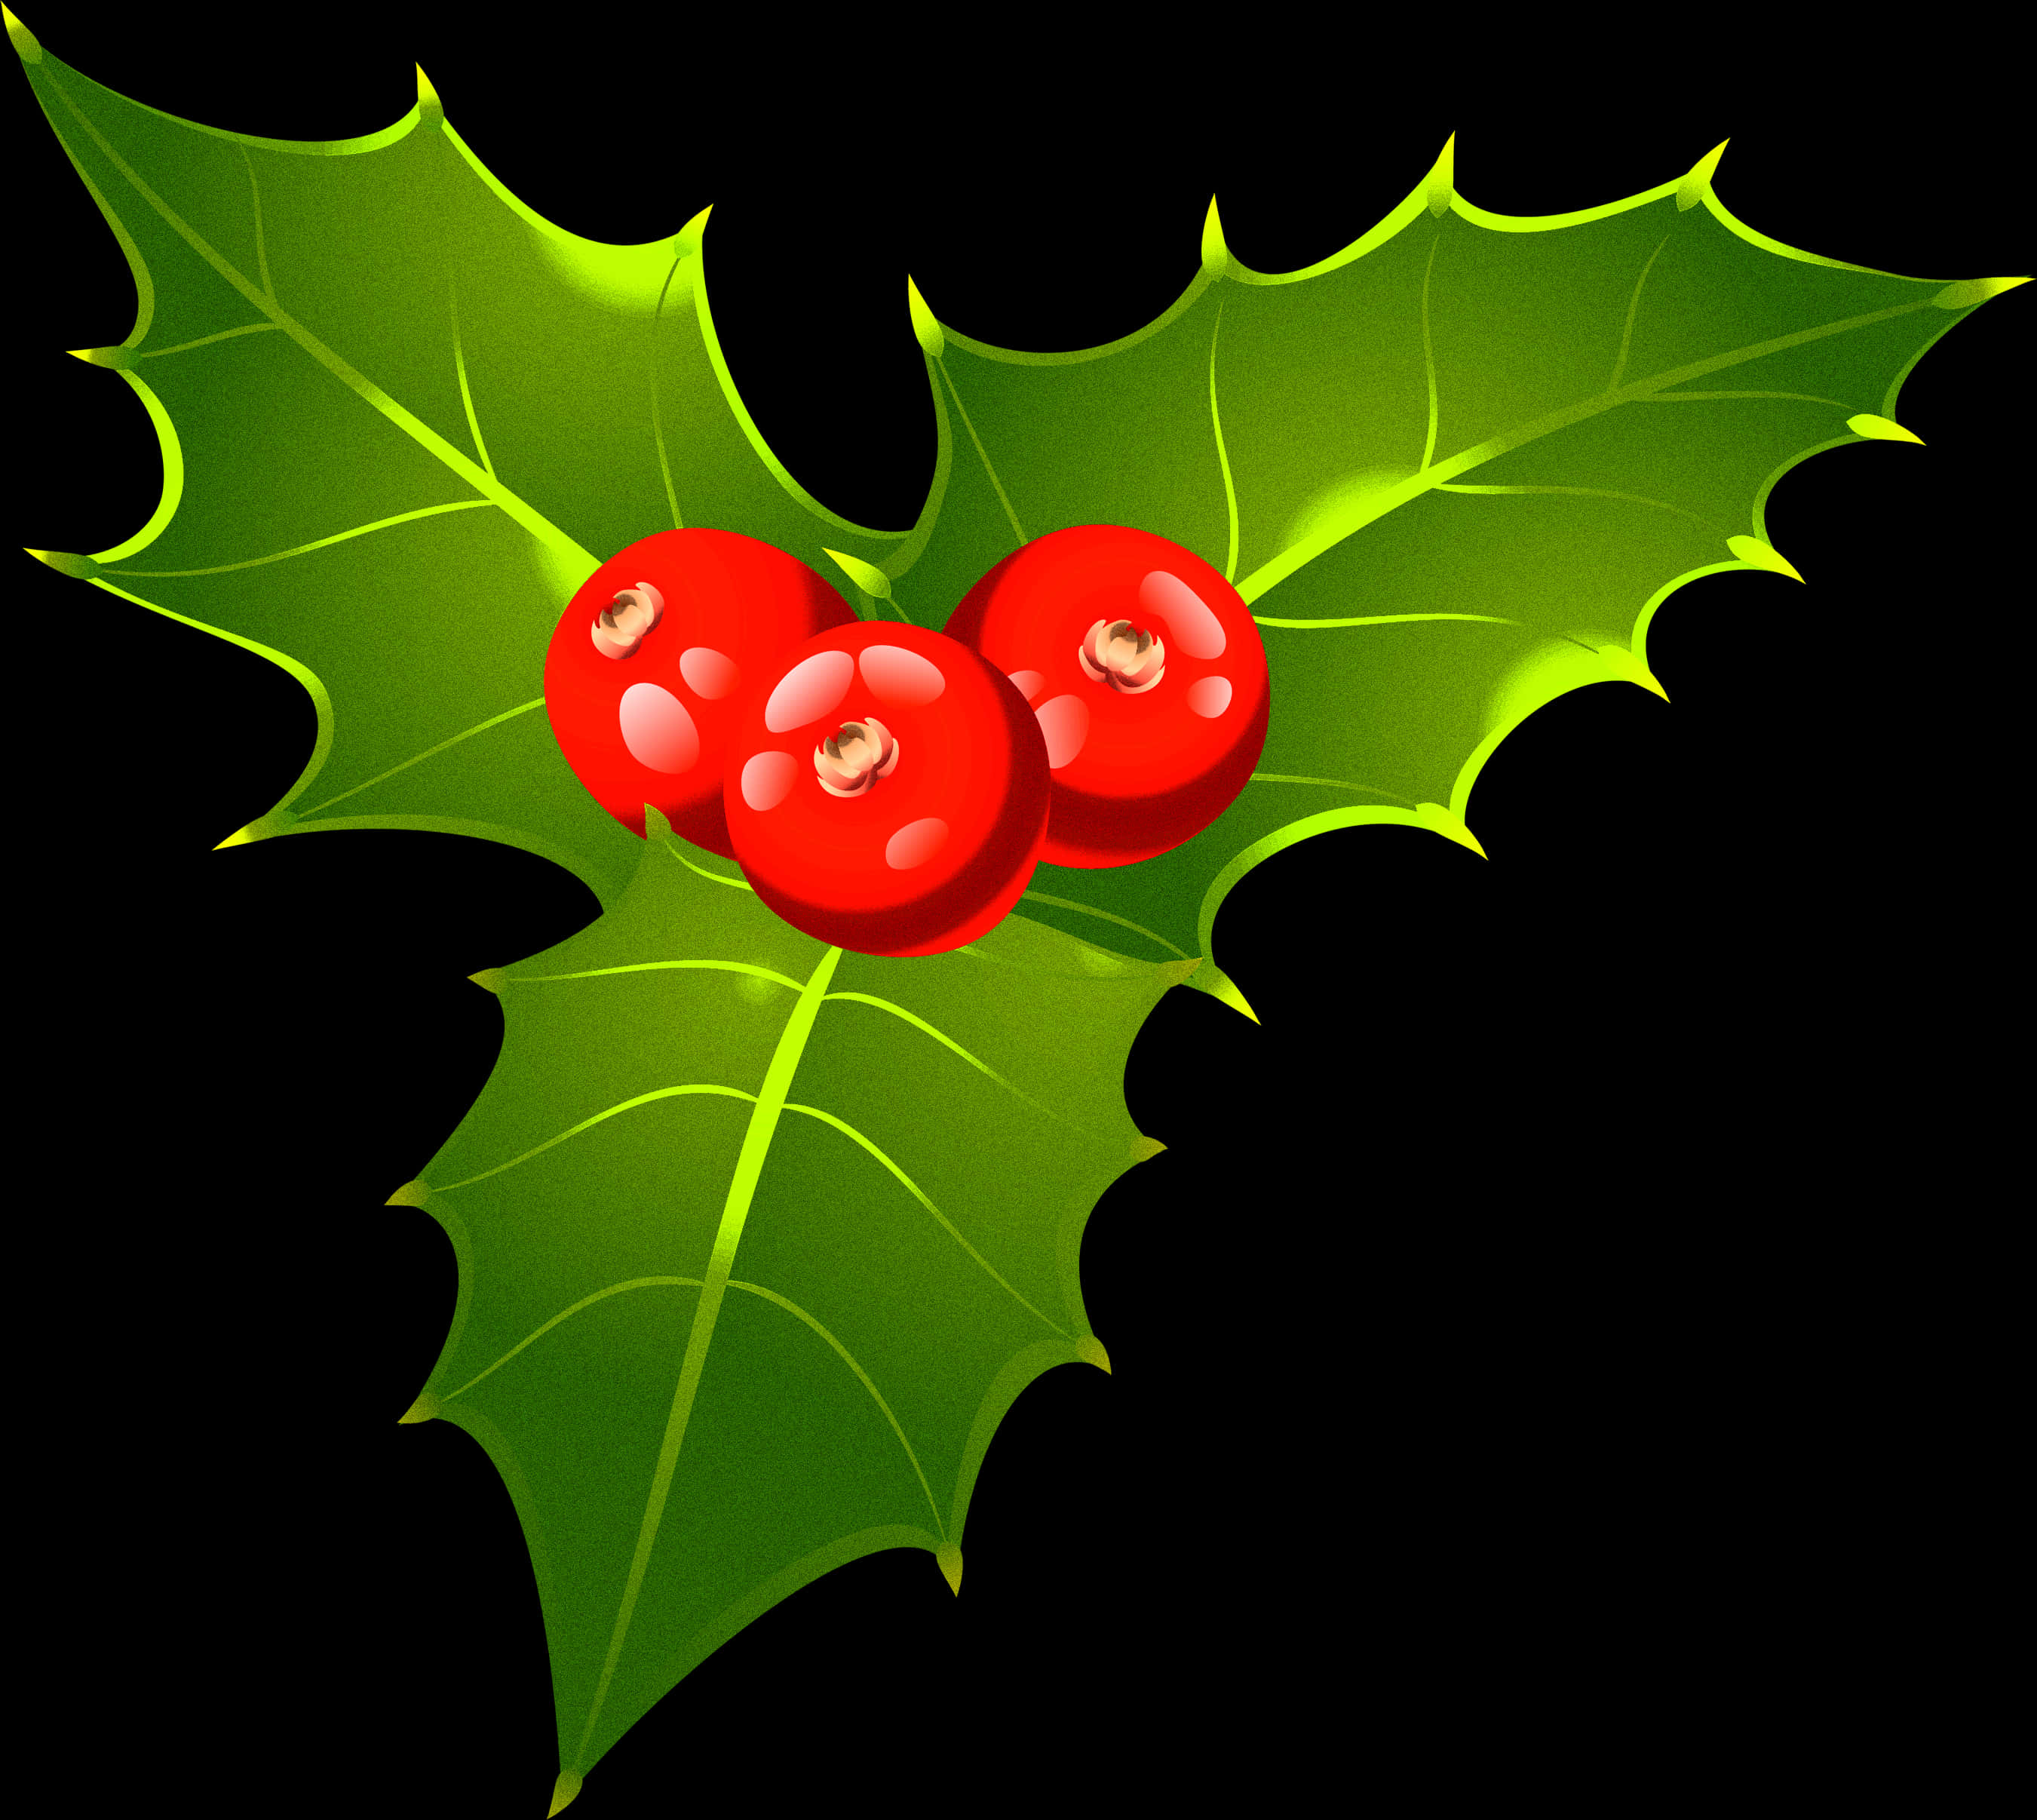 A Holly Leaf With Berries On It